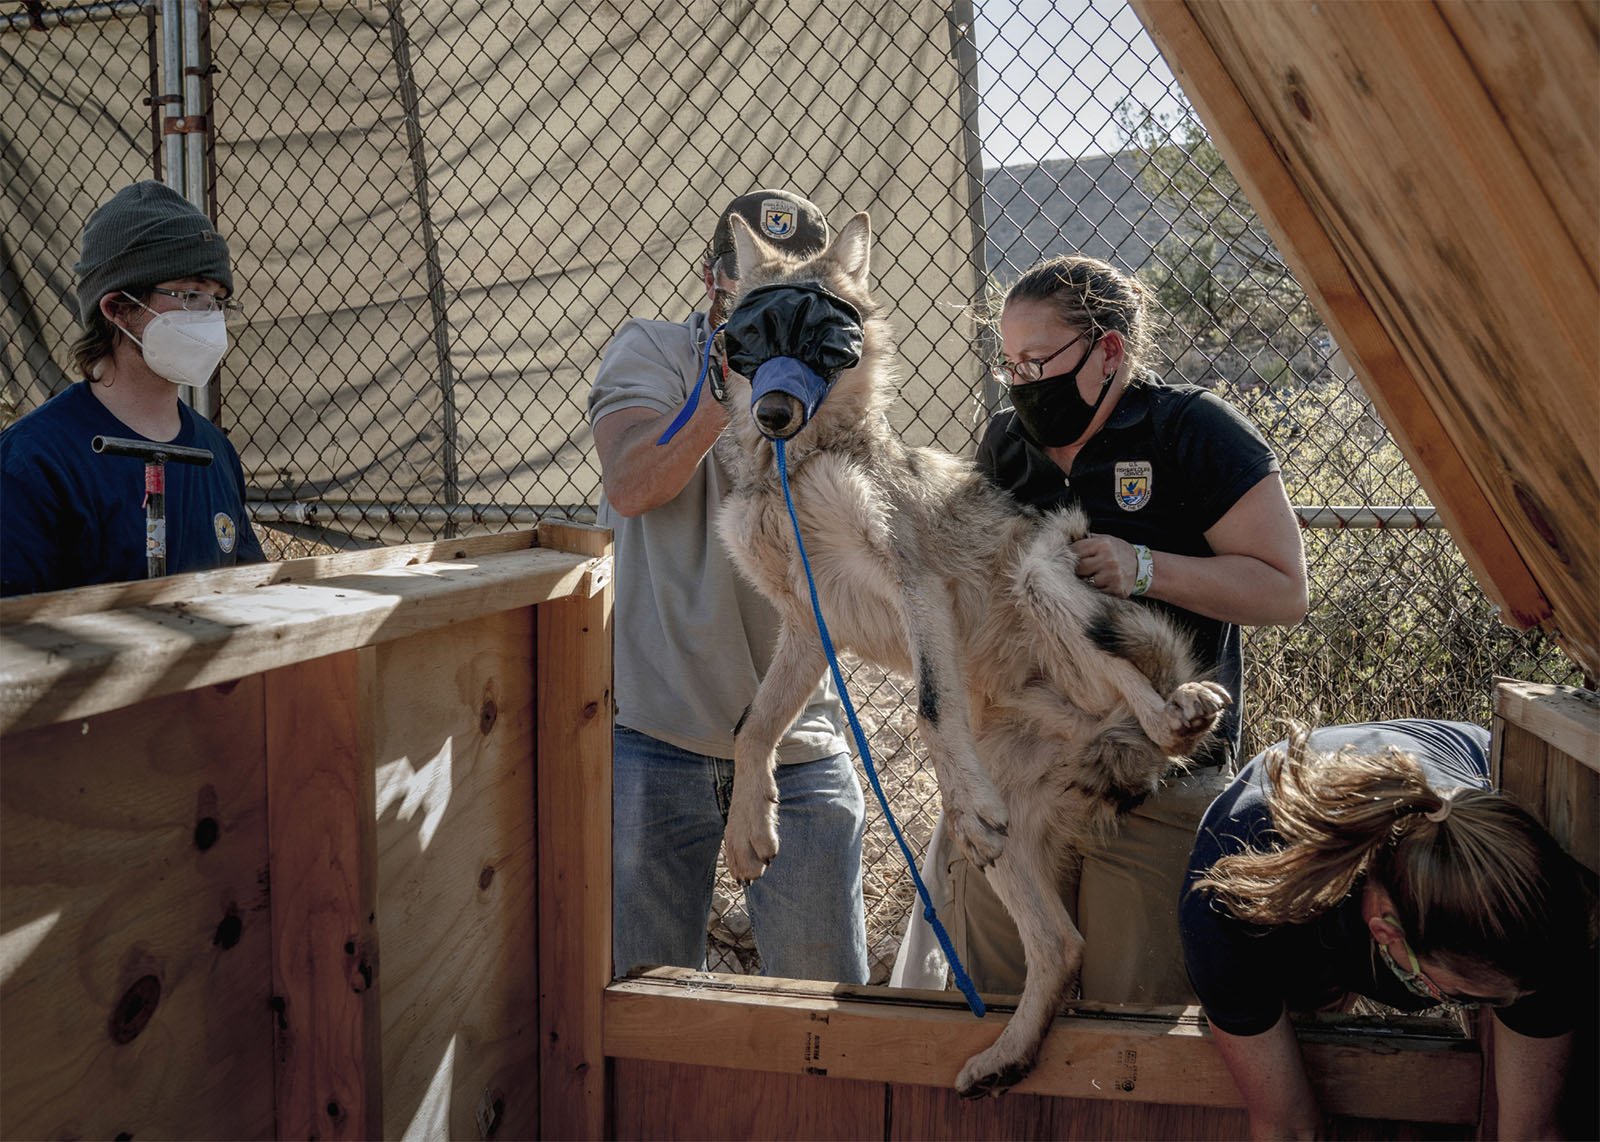 Wildlife rescue team members, wearing masks and gloves, carefully lift a sedated wolf from a wooden crate outdoors, preparing to transport it to a new location.